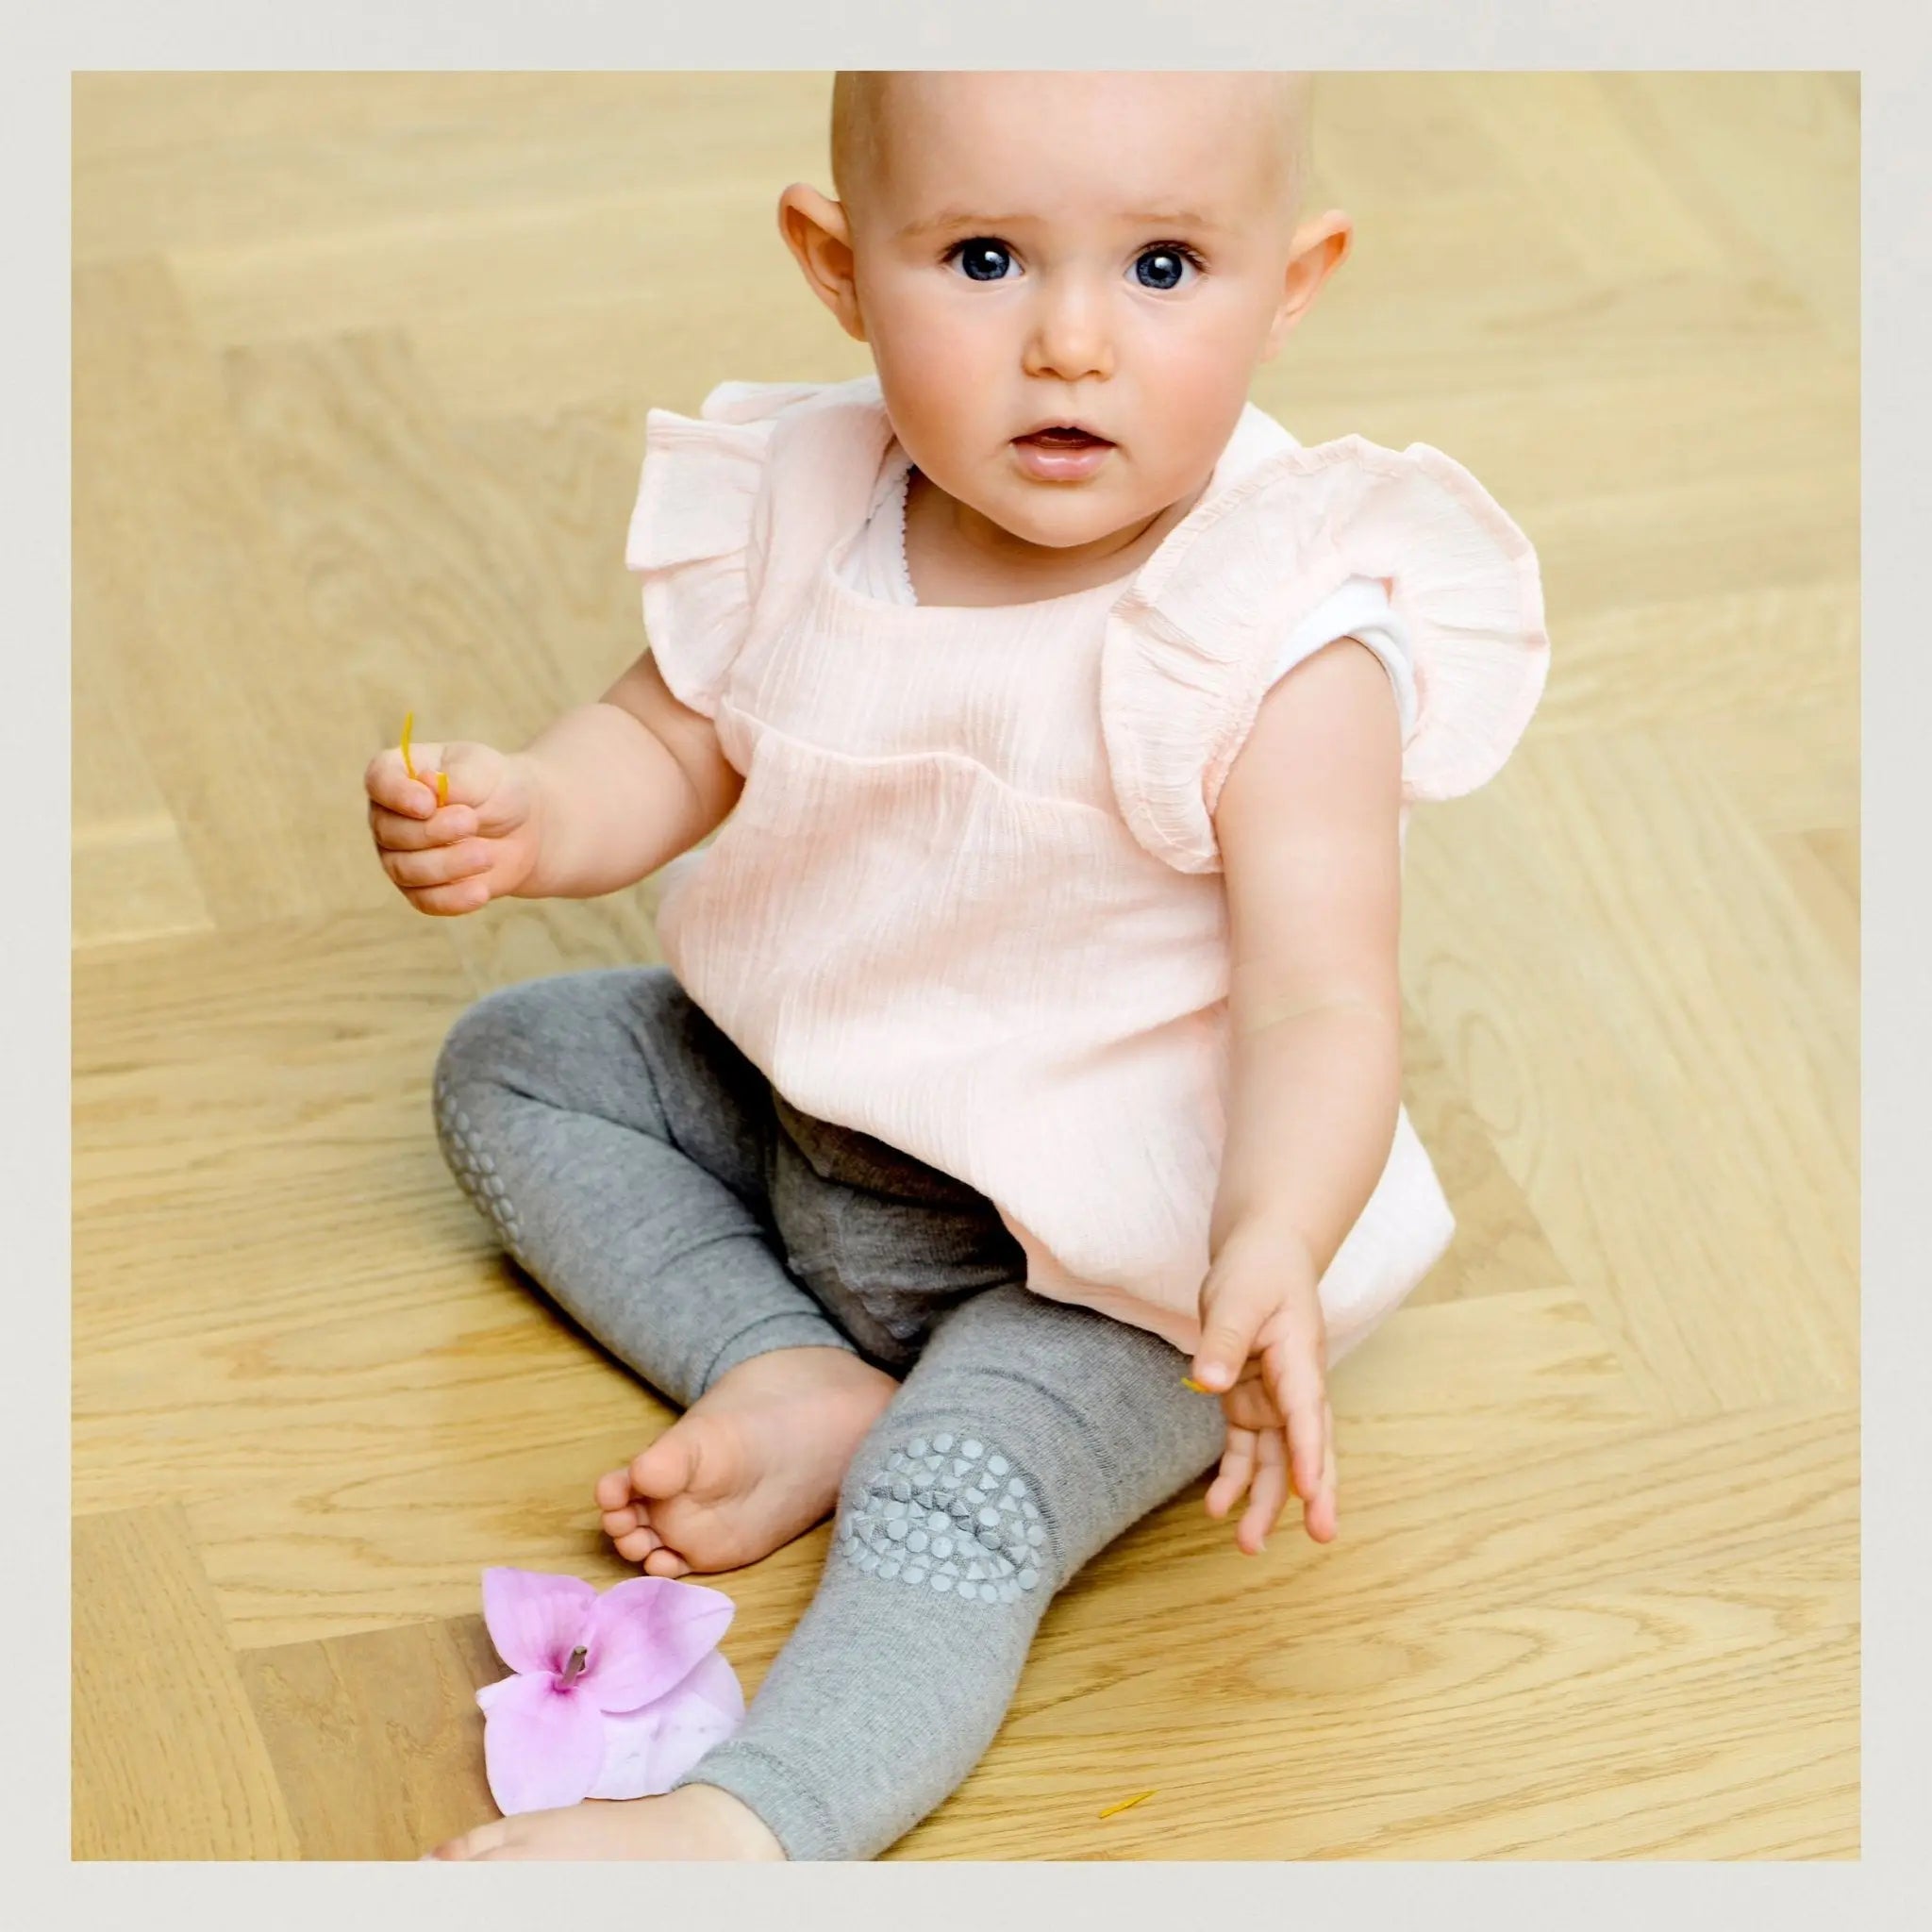 Baby Leggings - Sorry, I can't adult today. -A tired mom😂😂 www. babyleggings.com #babyleggings #legging #leggings #babystyle #babyclothes  #babyshop #babyboutique #cutebaby #babypants #toddlerstyle #toddlershop  #toddlerboutique #kidsstyle #baby ...